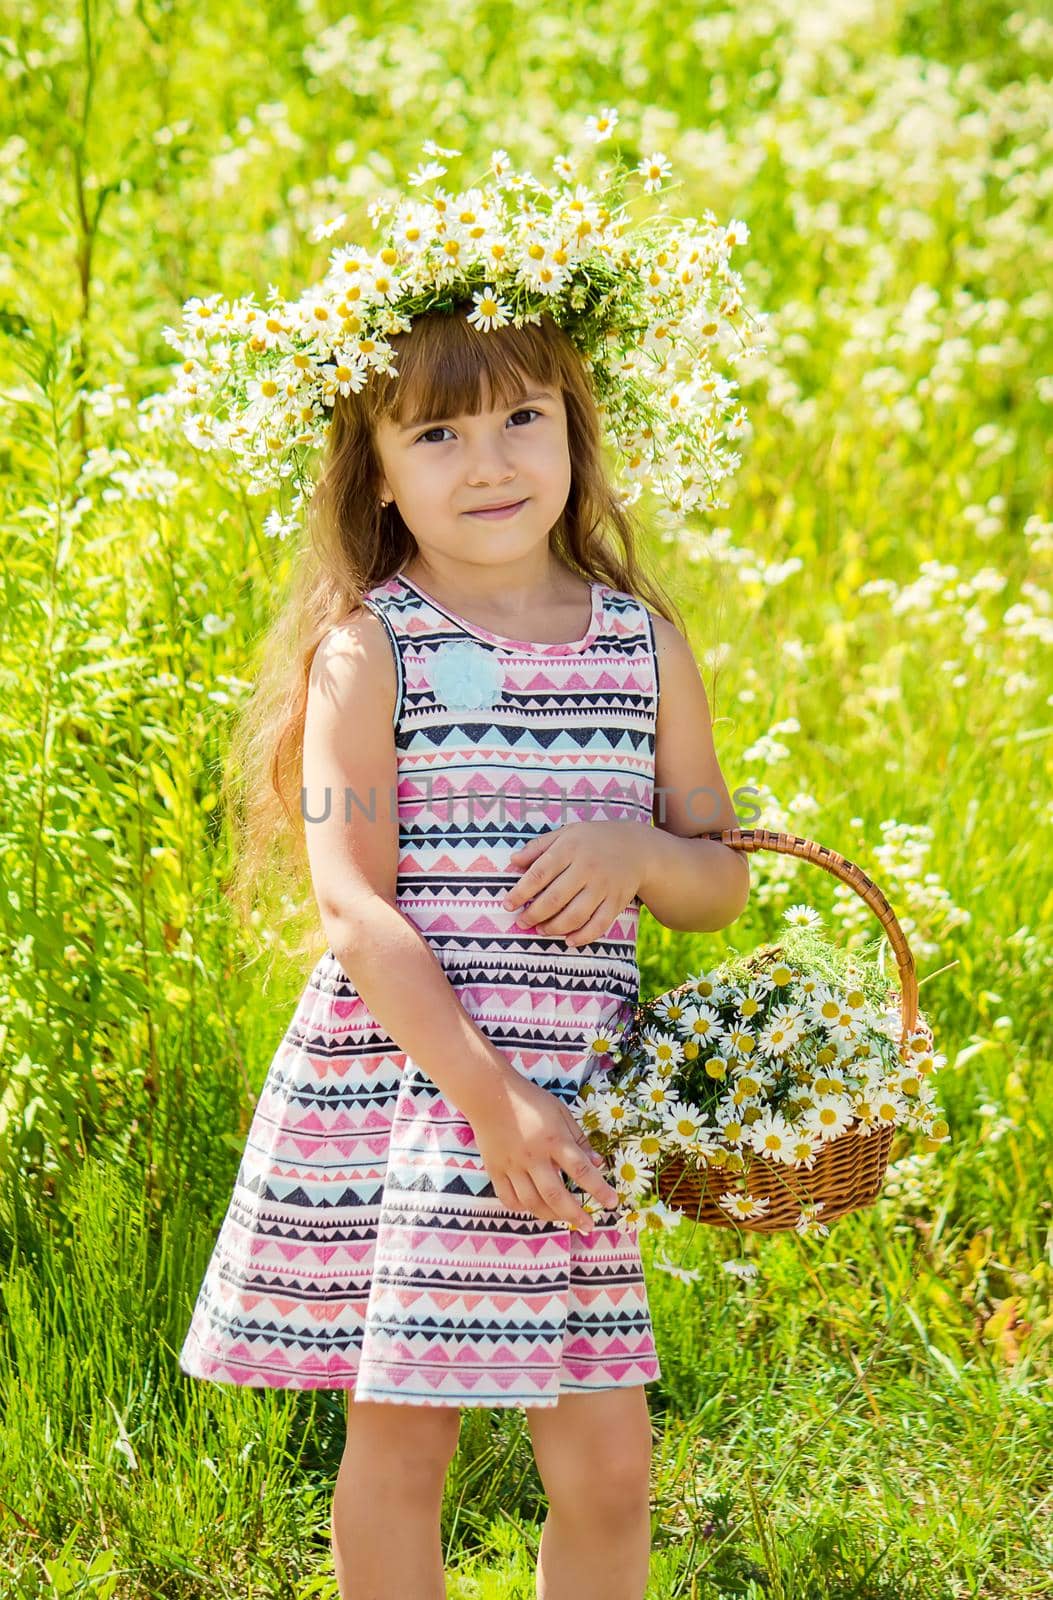 Girl with chamomile. Selective focus. nature flowers. Child.